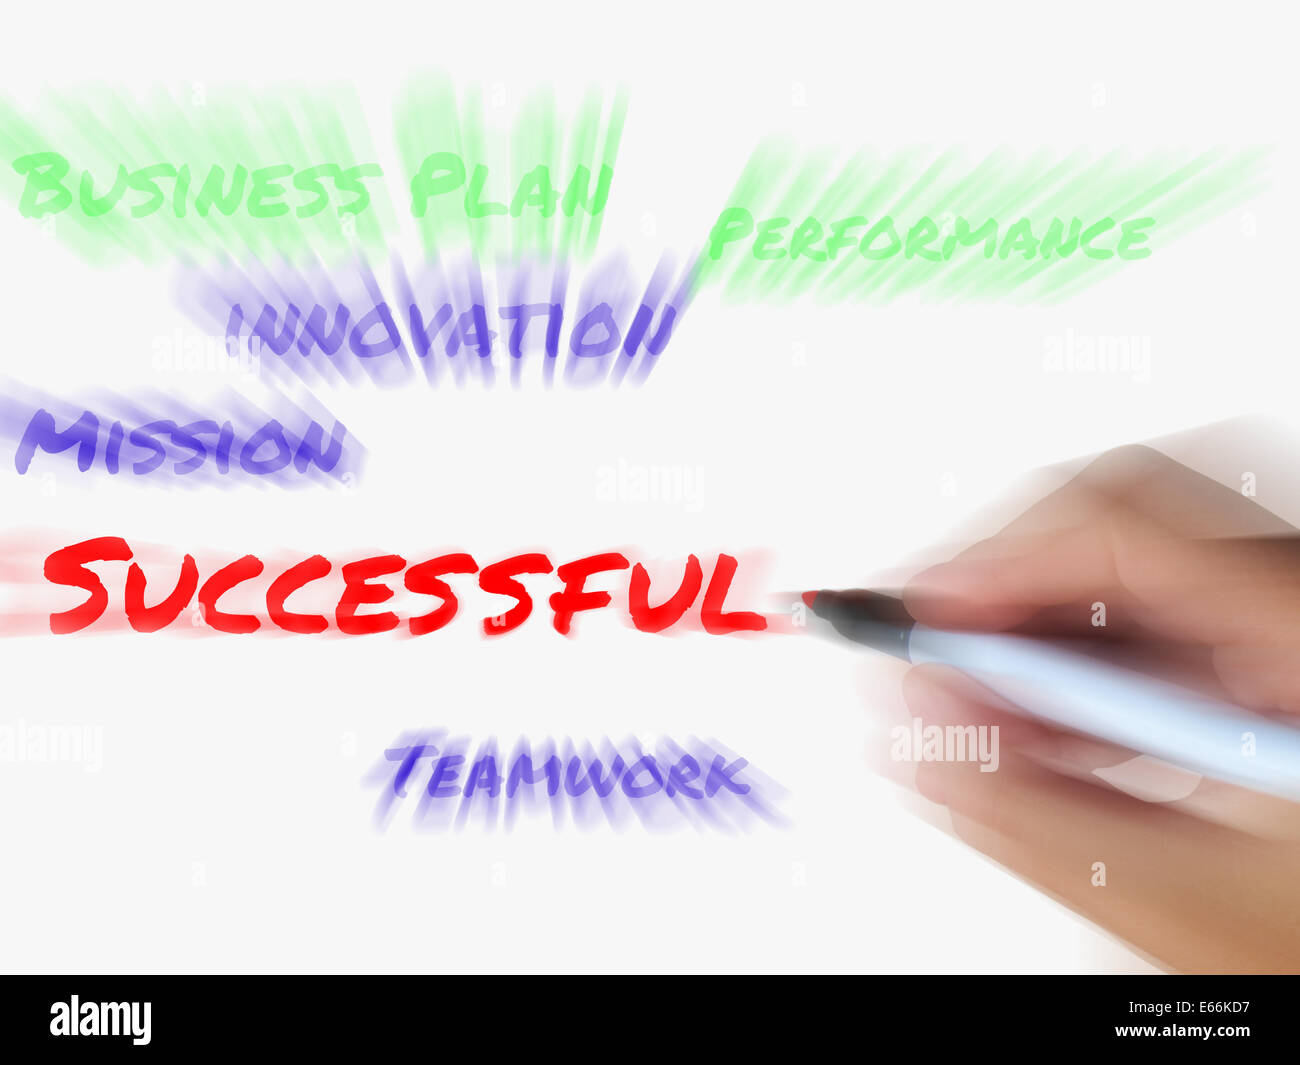 Successful on Whiteboard Displaying achieving Solutions and Accomplishment Stock Photo